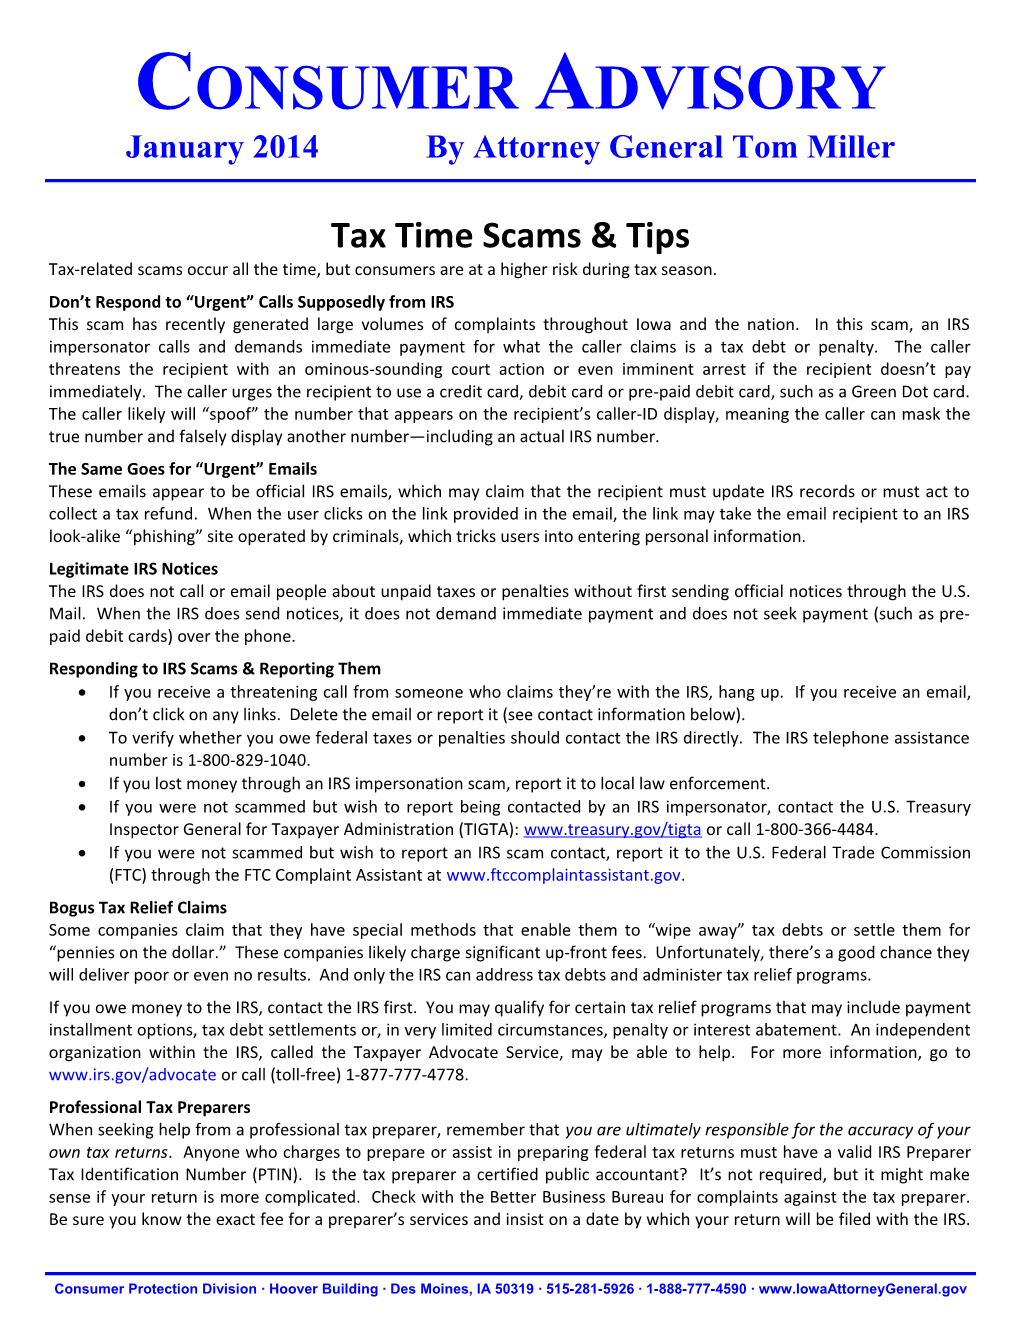 Tax Time Scams & Tips